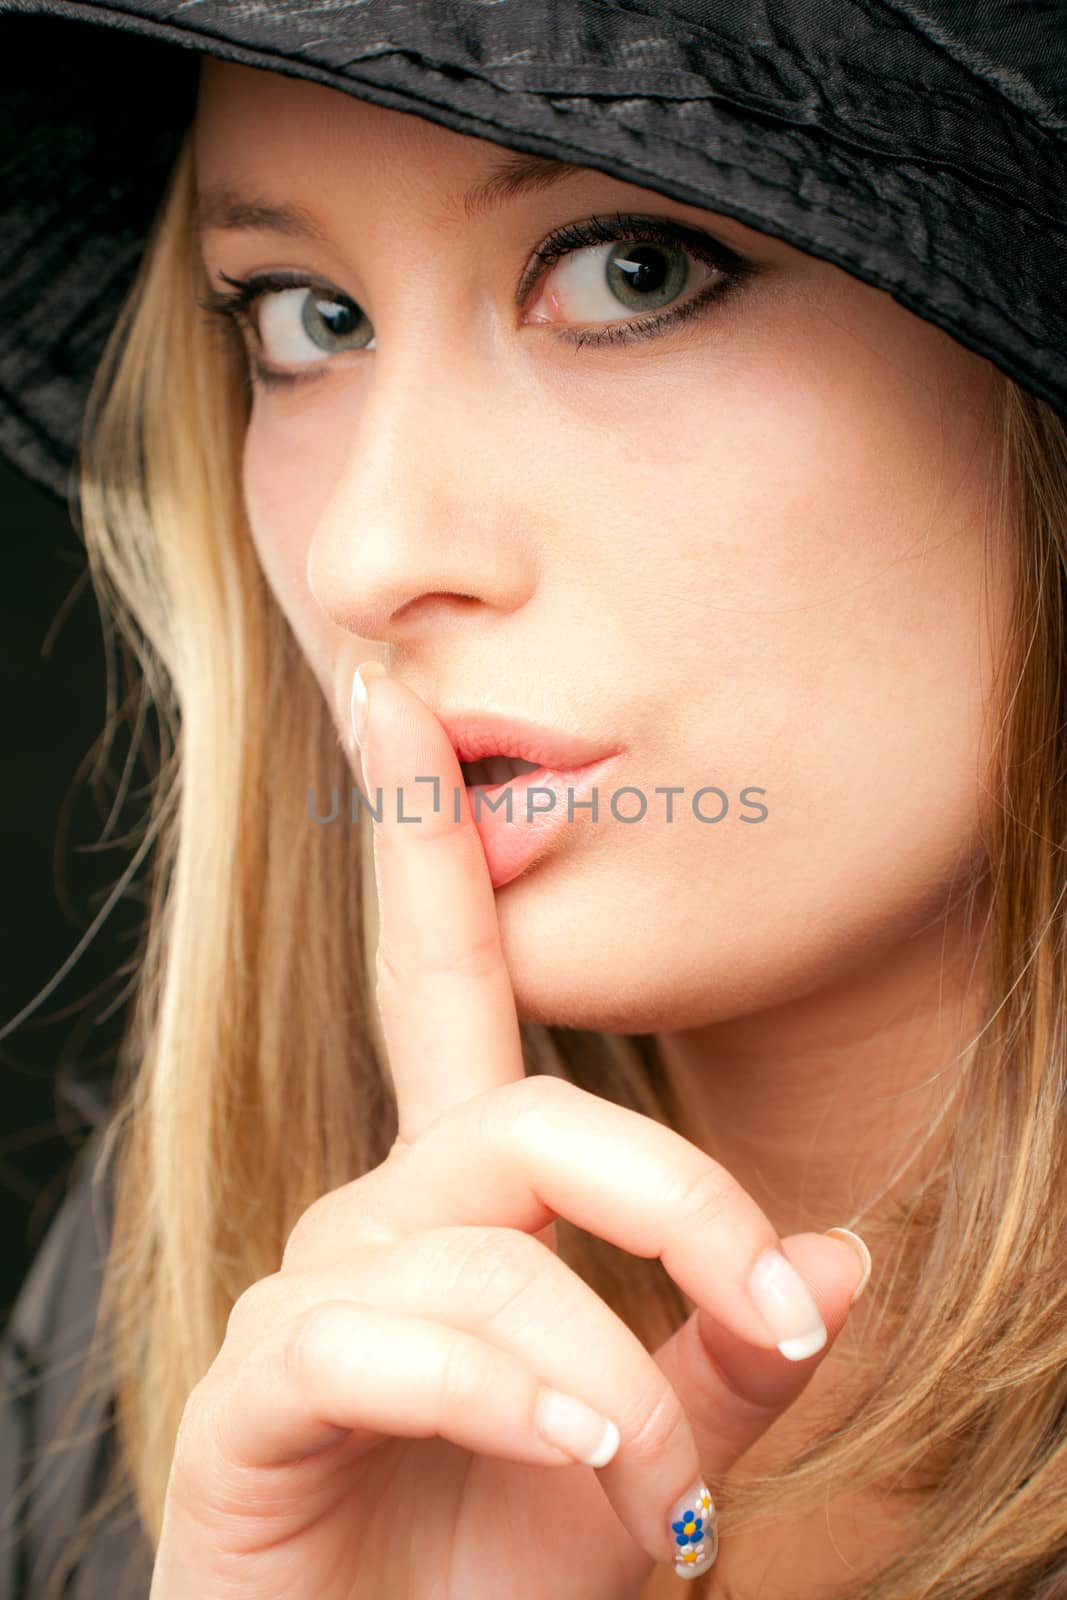 Beautiful blonde woman face showing shush with finger over mouth, looking at camera